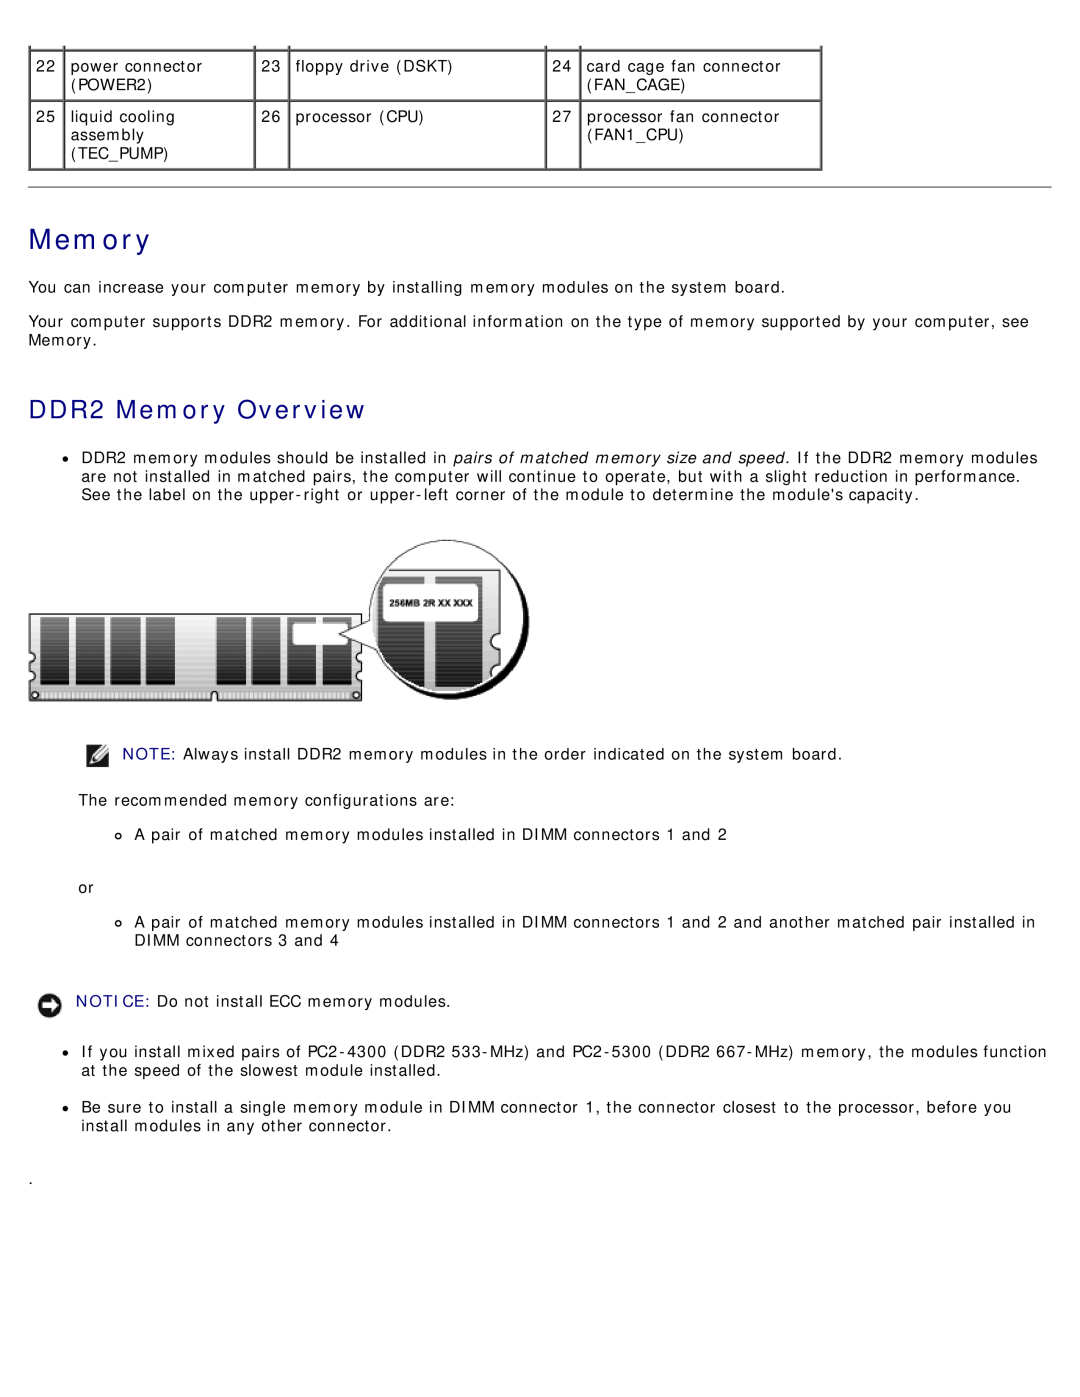 Dell DCDO, 710 H2C service manual DDR2 Memory Overview 